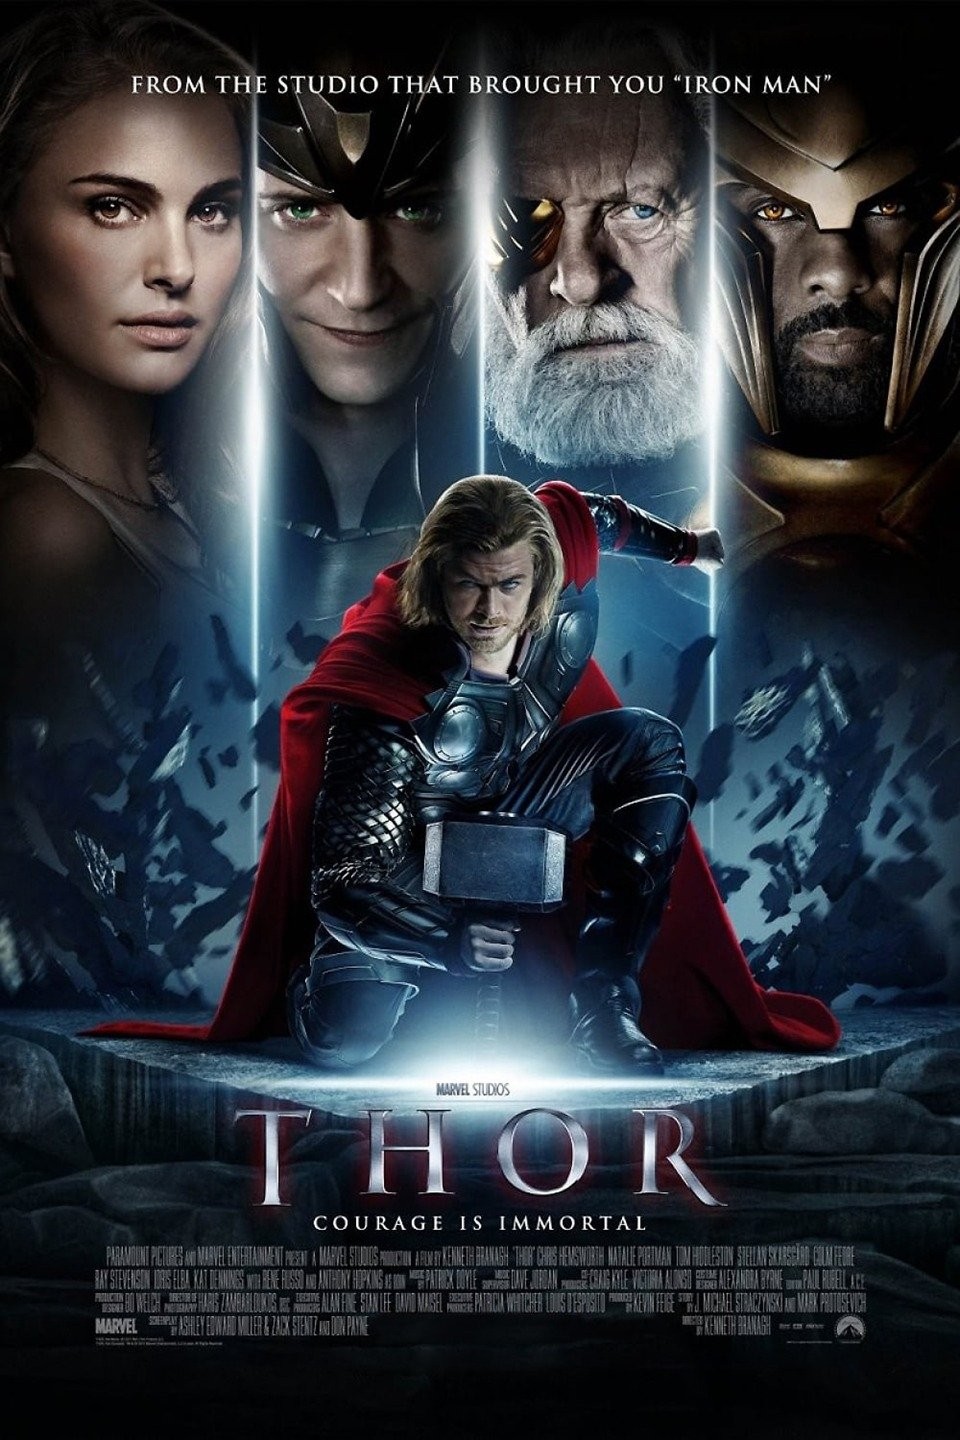 How 'Thor 4' Looks Without Any Visual Effects: Photos